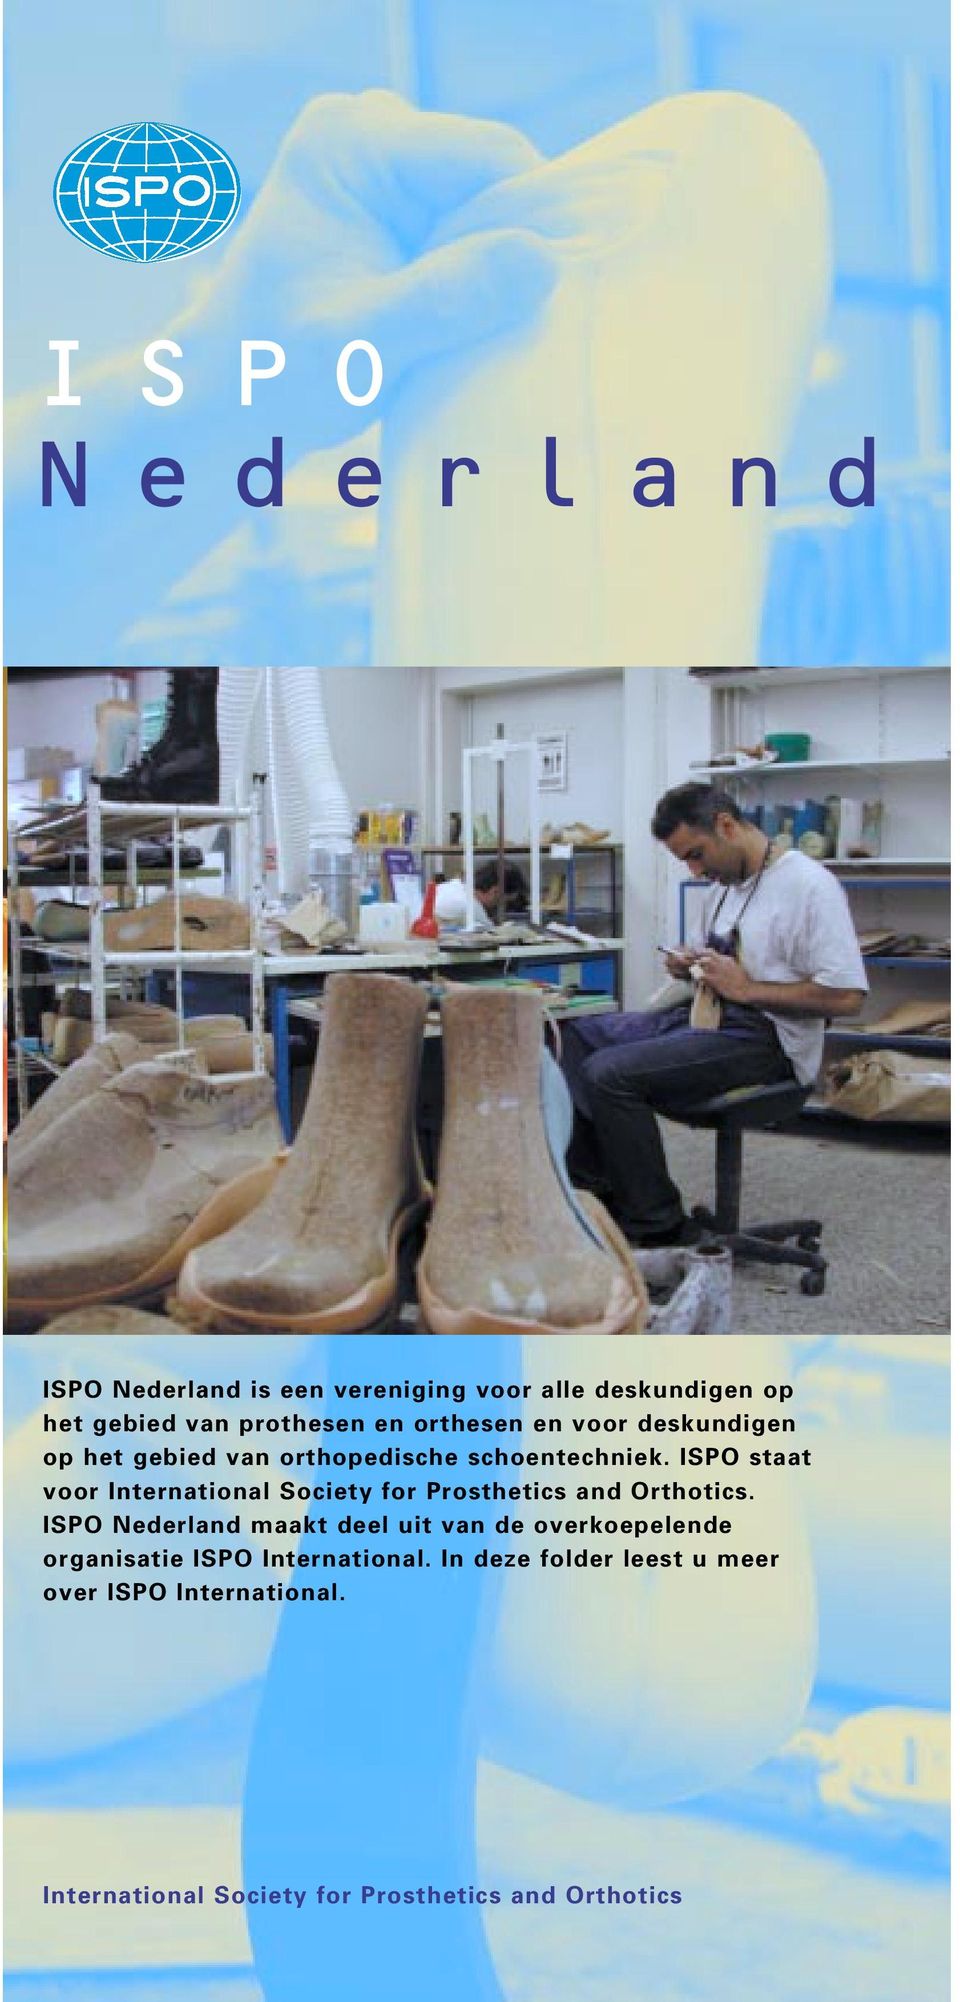 ISPO staat voor International Society for Prosthetics and Orthotics.